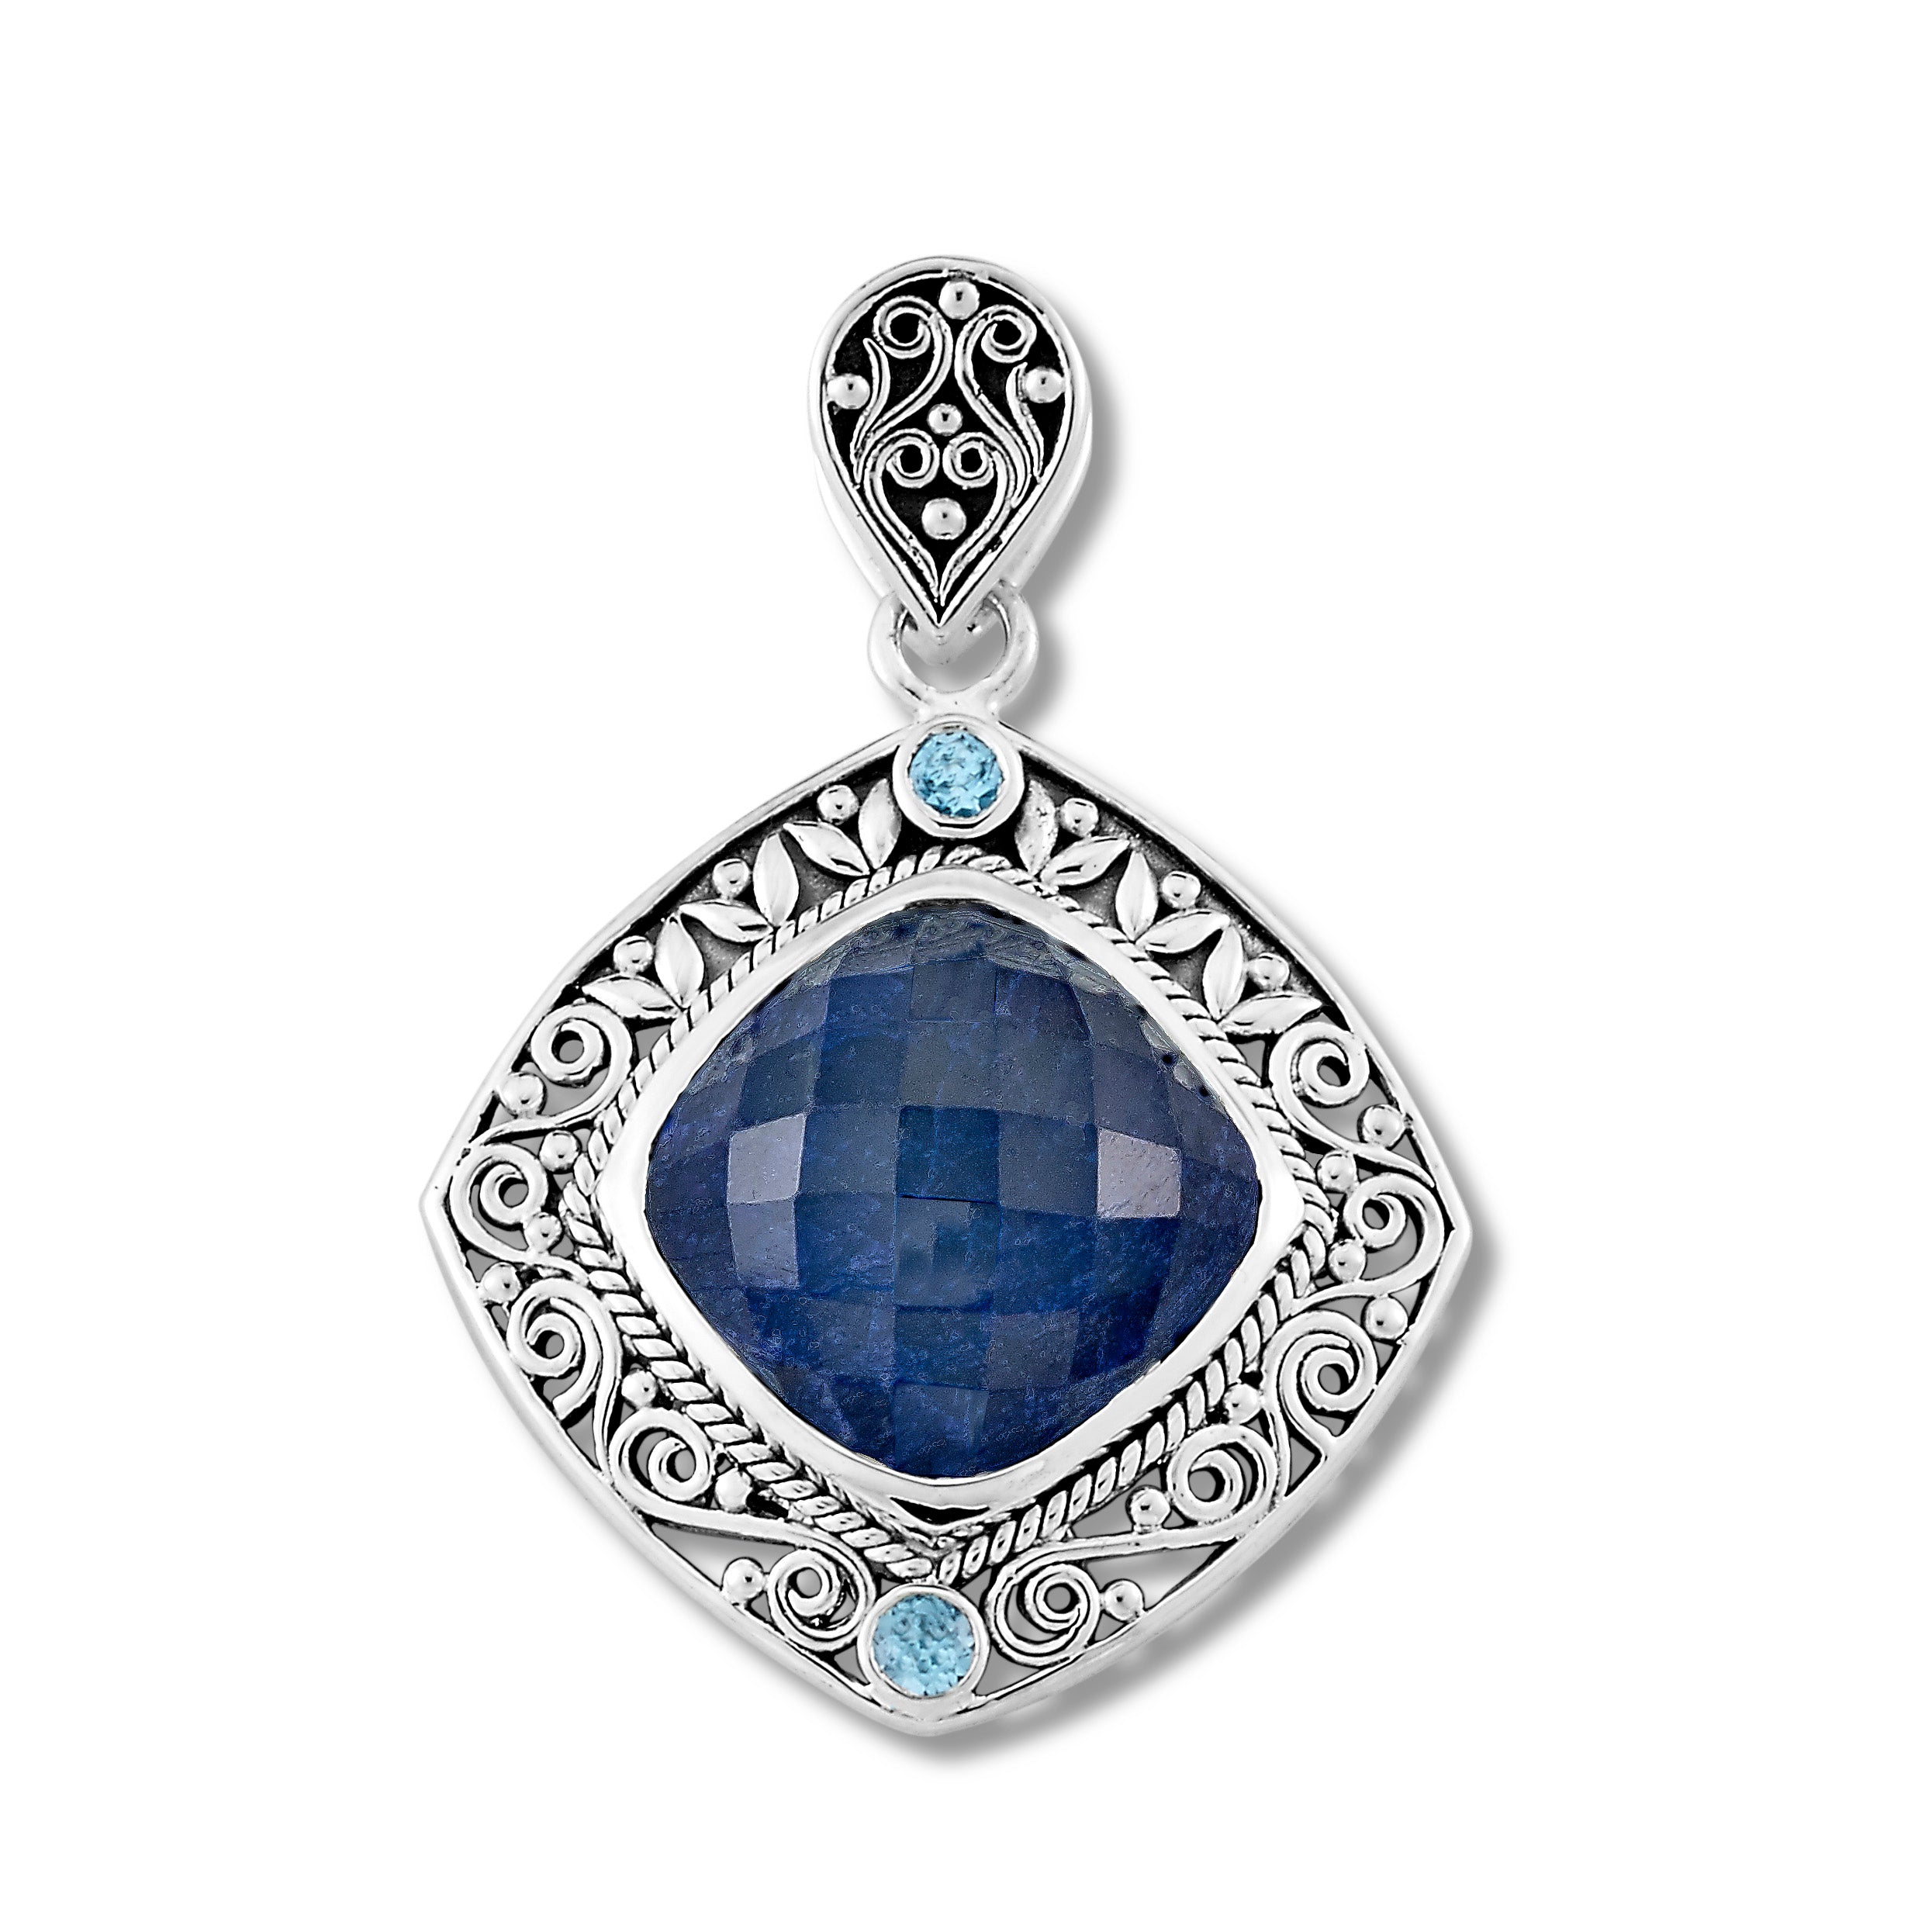 Samuel B Sterling Silver and 18K Yellow Gold Telago Pendant. Our Sterling Silver checkerboard cut dyed blue corundum pendant with blue topaz accents, handcrafted in Bali by our skilled artisans. From our signature collection, Royal Bali™ featuring designs handcrafted using sterling silver and genuine gemstones.